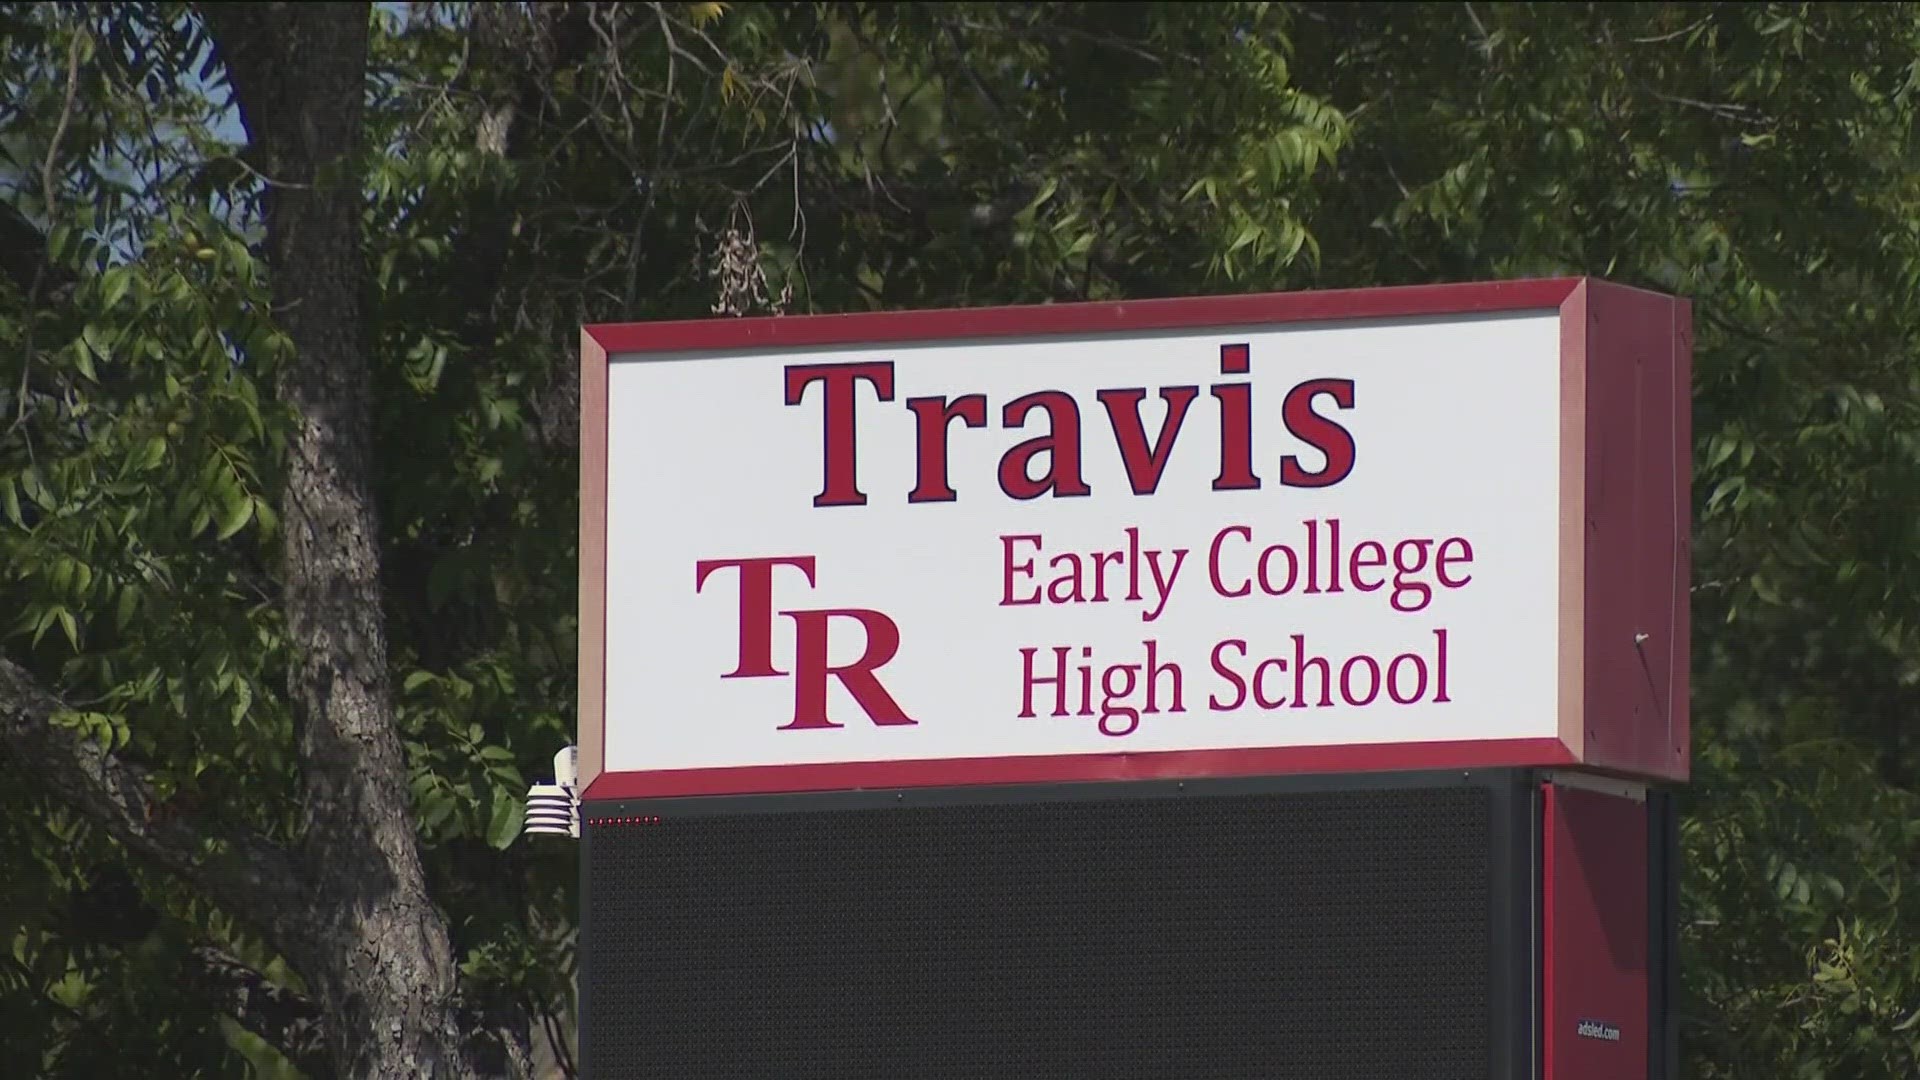 Staff and some students at Travis Early College High School were arriving on campus as Thursday's investigation began to unfold.